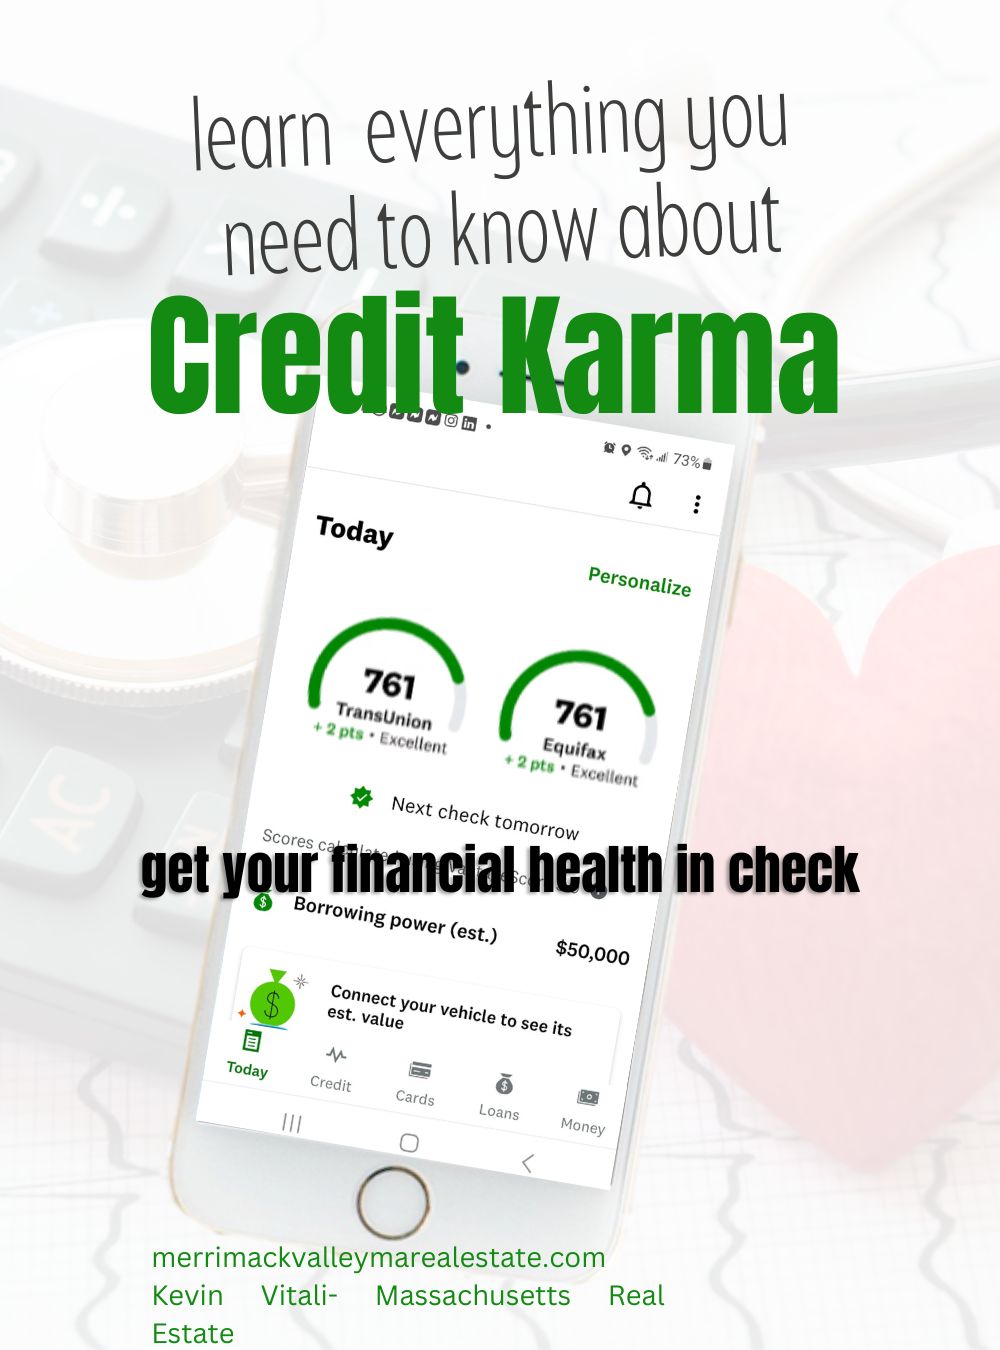 What is Credit Karma?